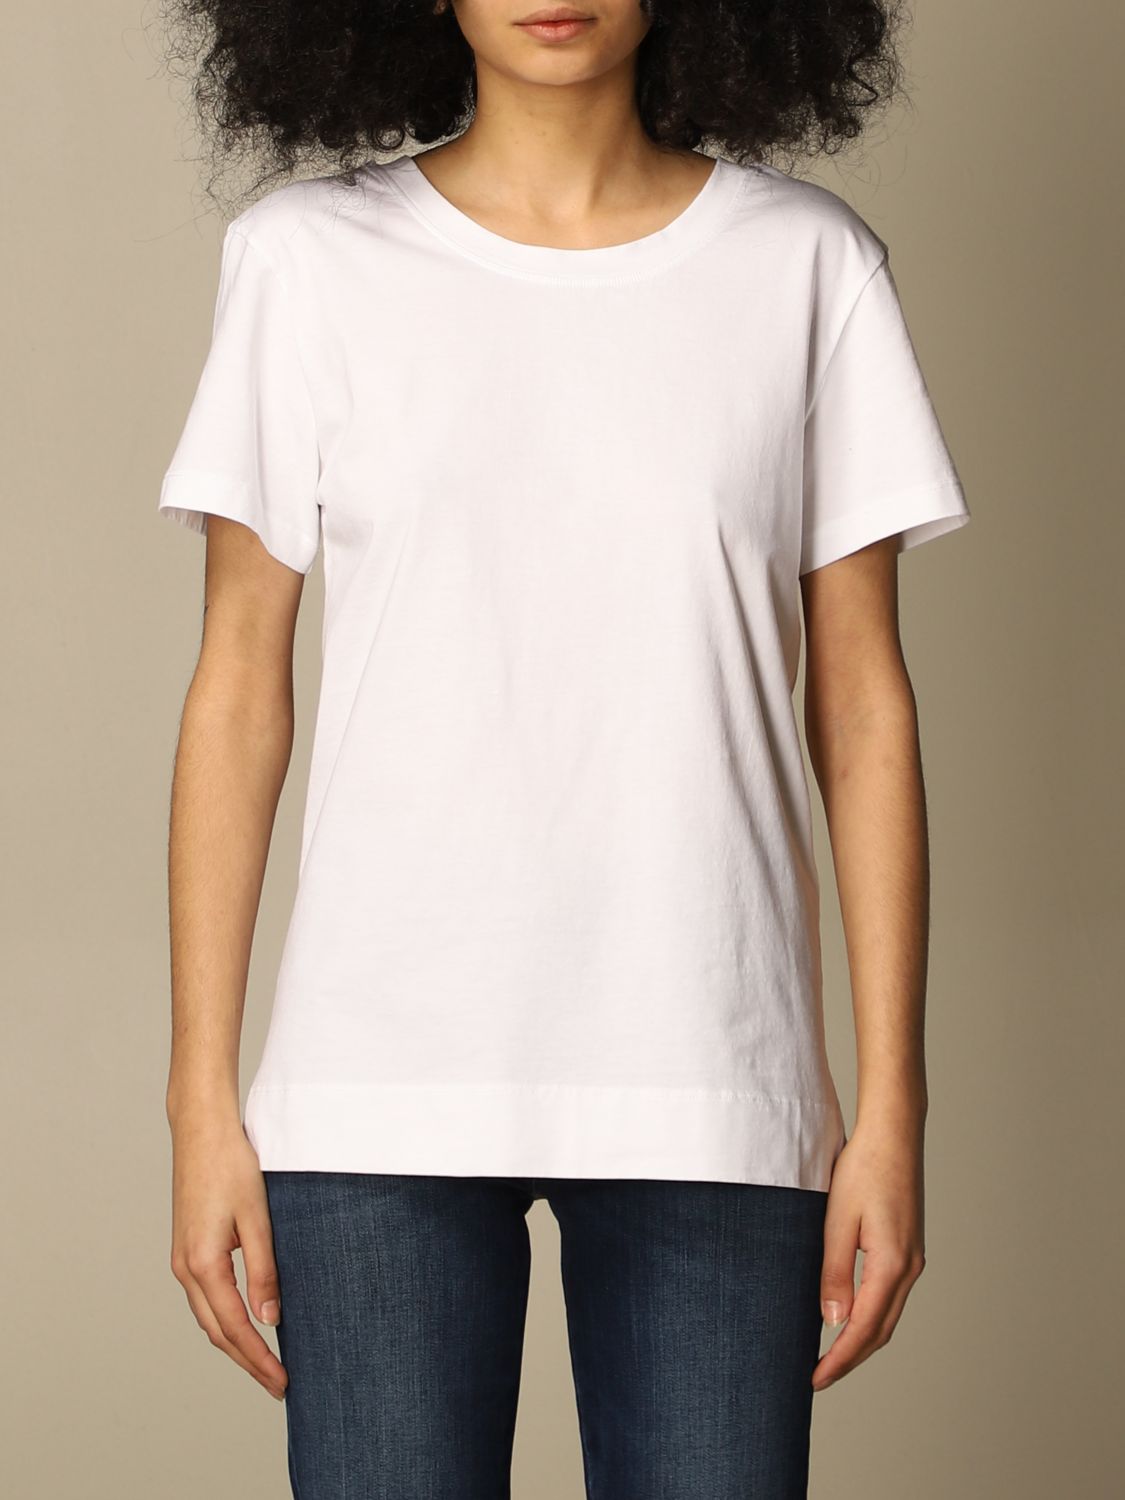 SEMICOUTURE: T-shirt with back logo | T-Shirt Semicouture Women White ...